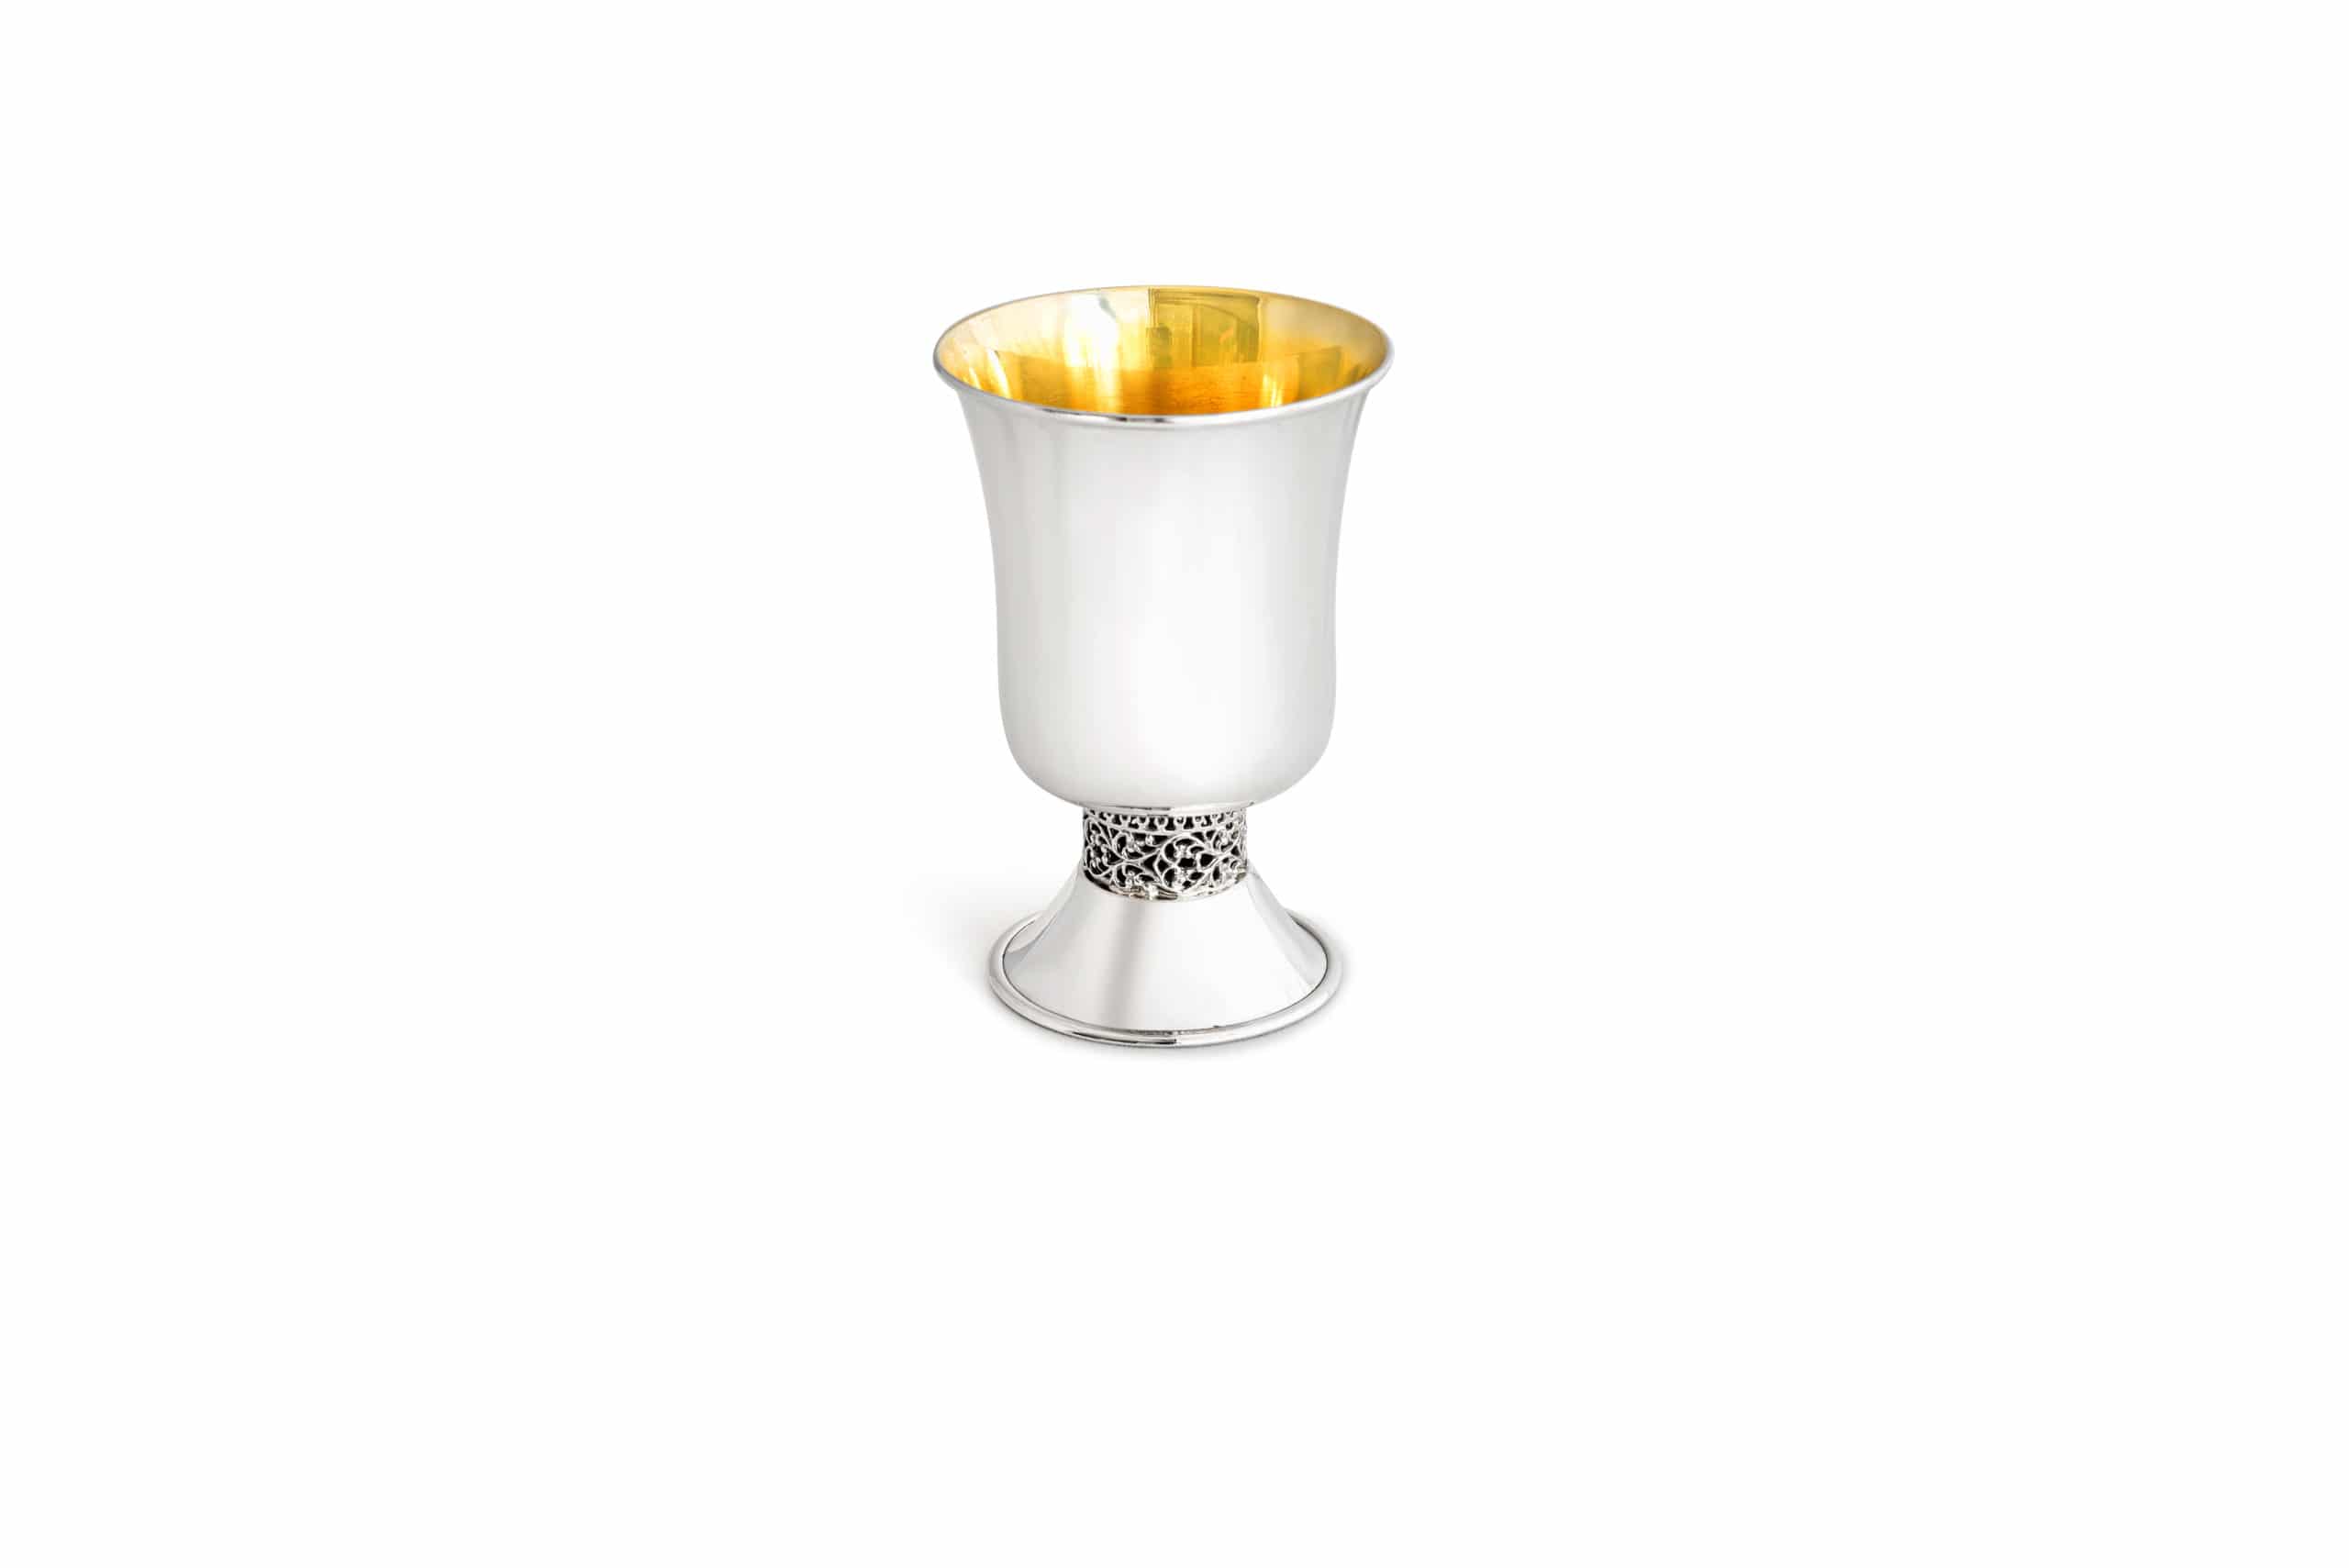 Sterling Silver Kiddush Cup with Filigree Band